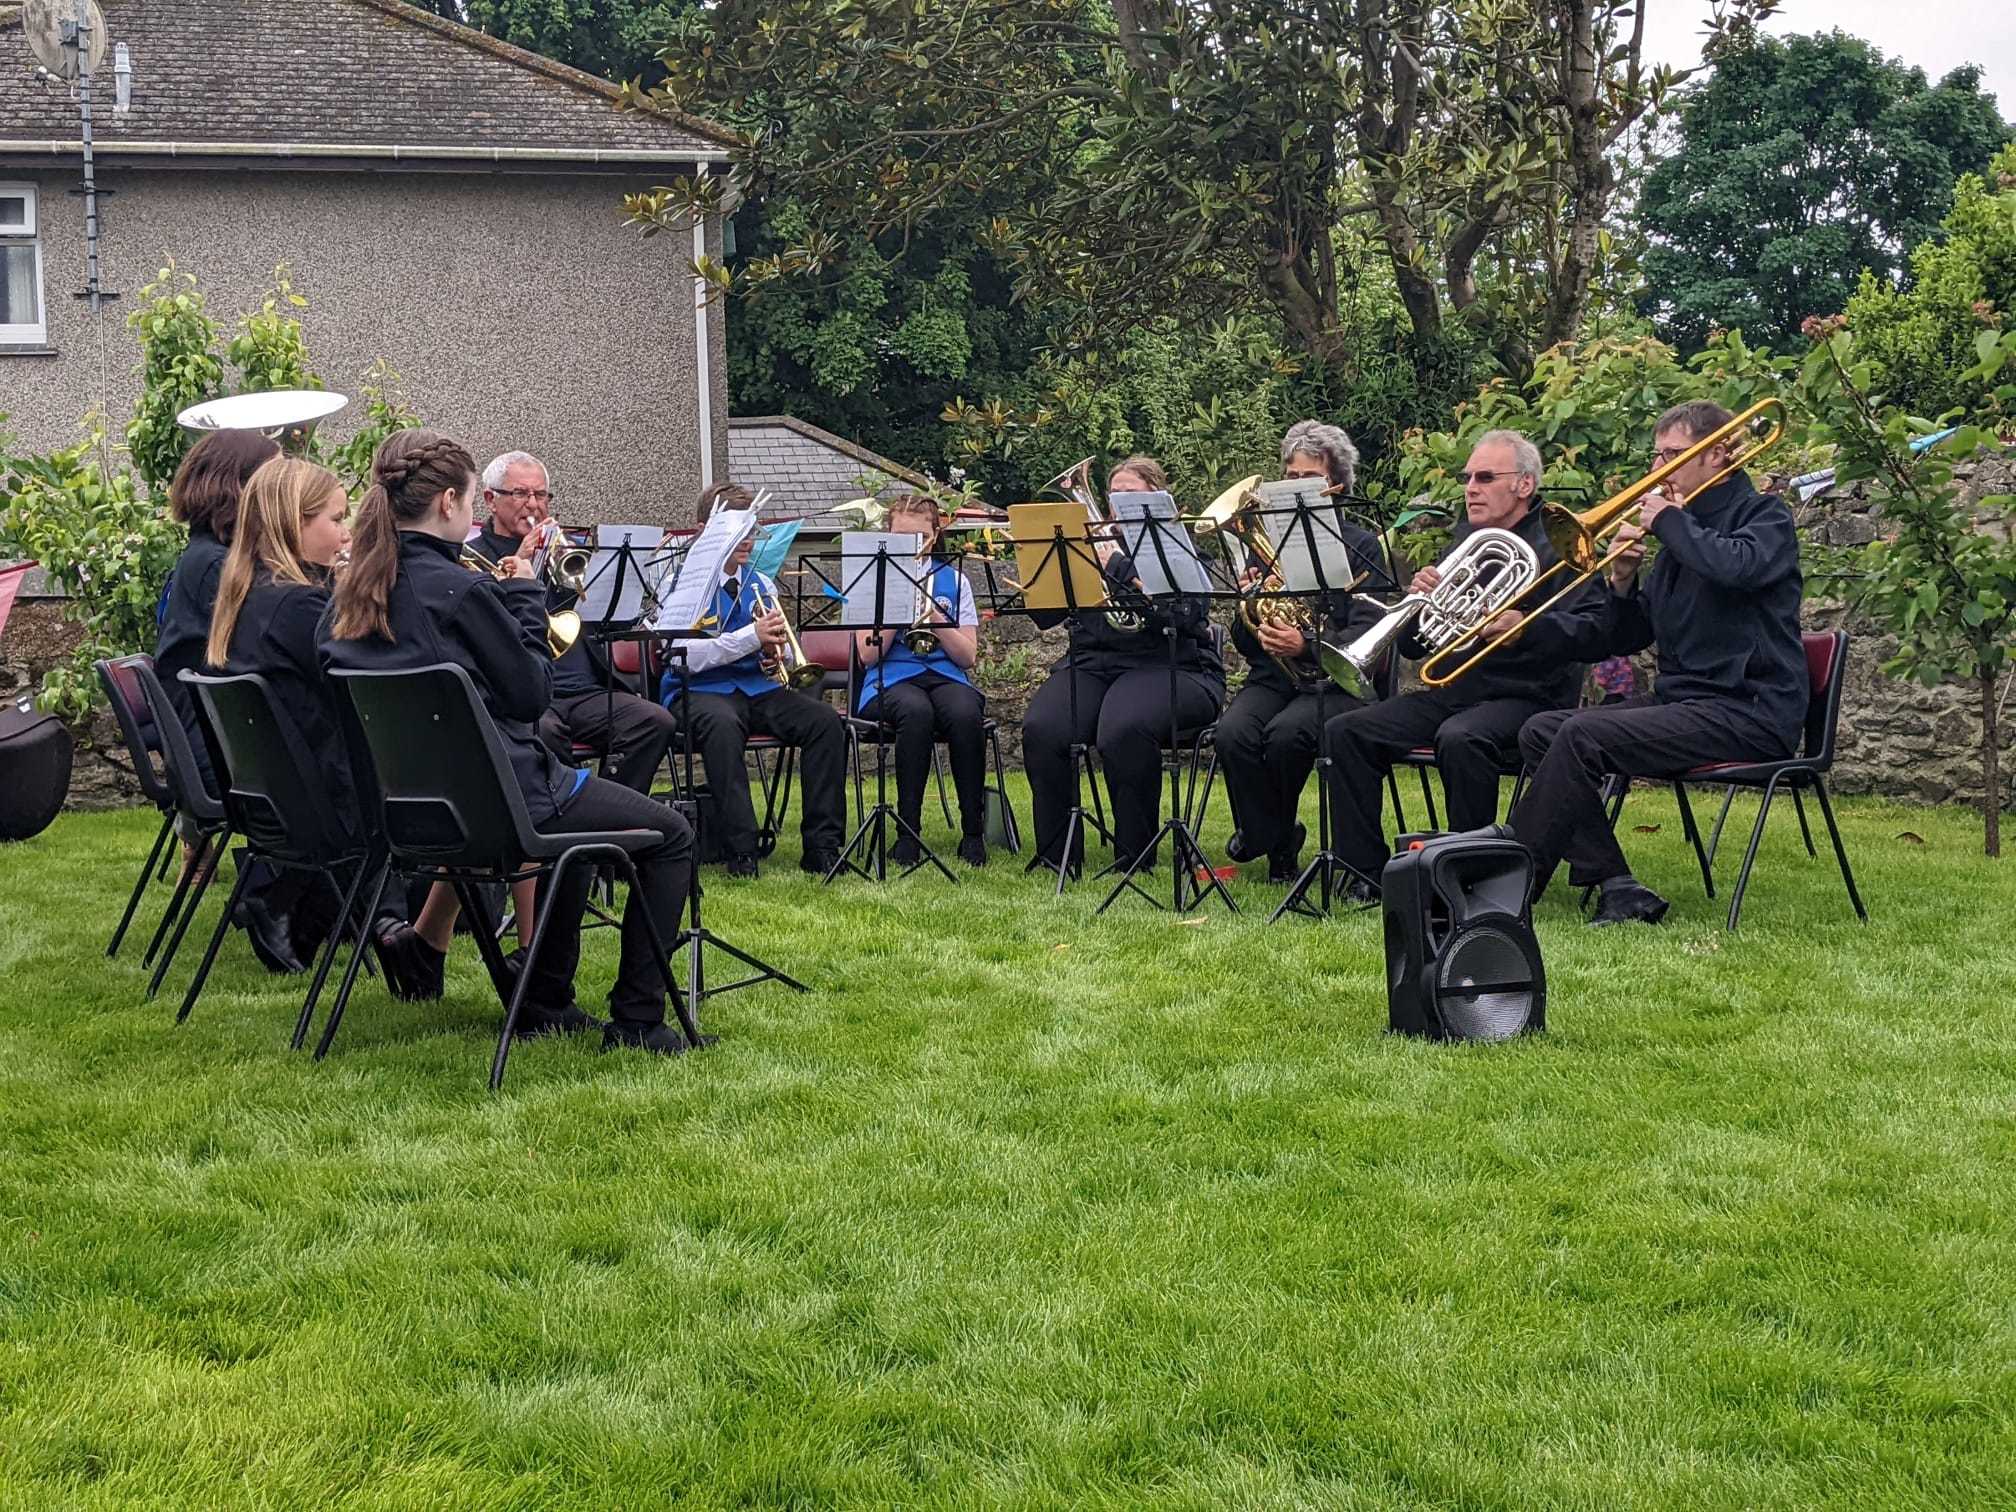 Helston Town Band Juniors performed some classics